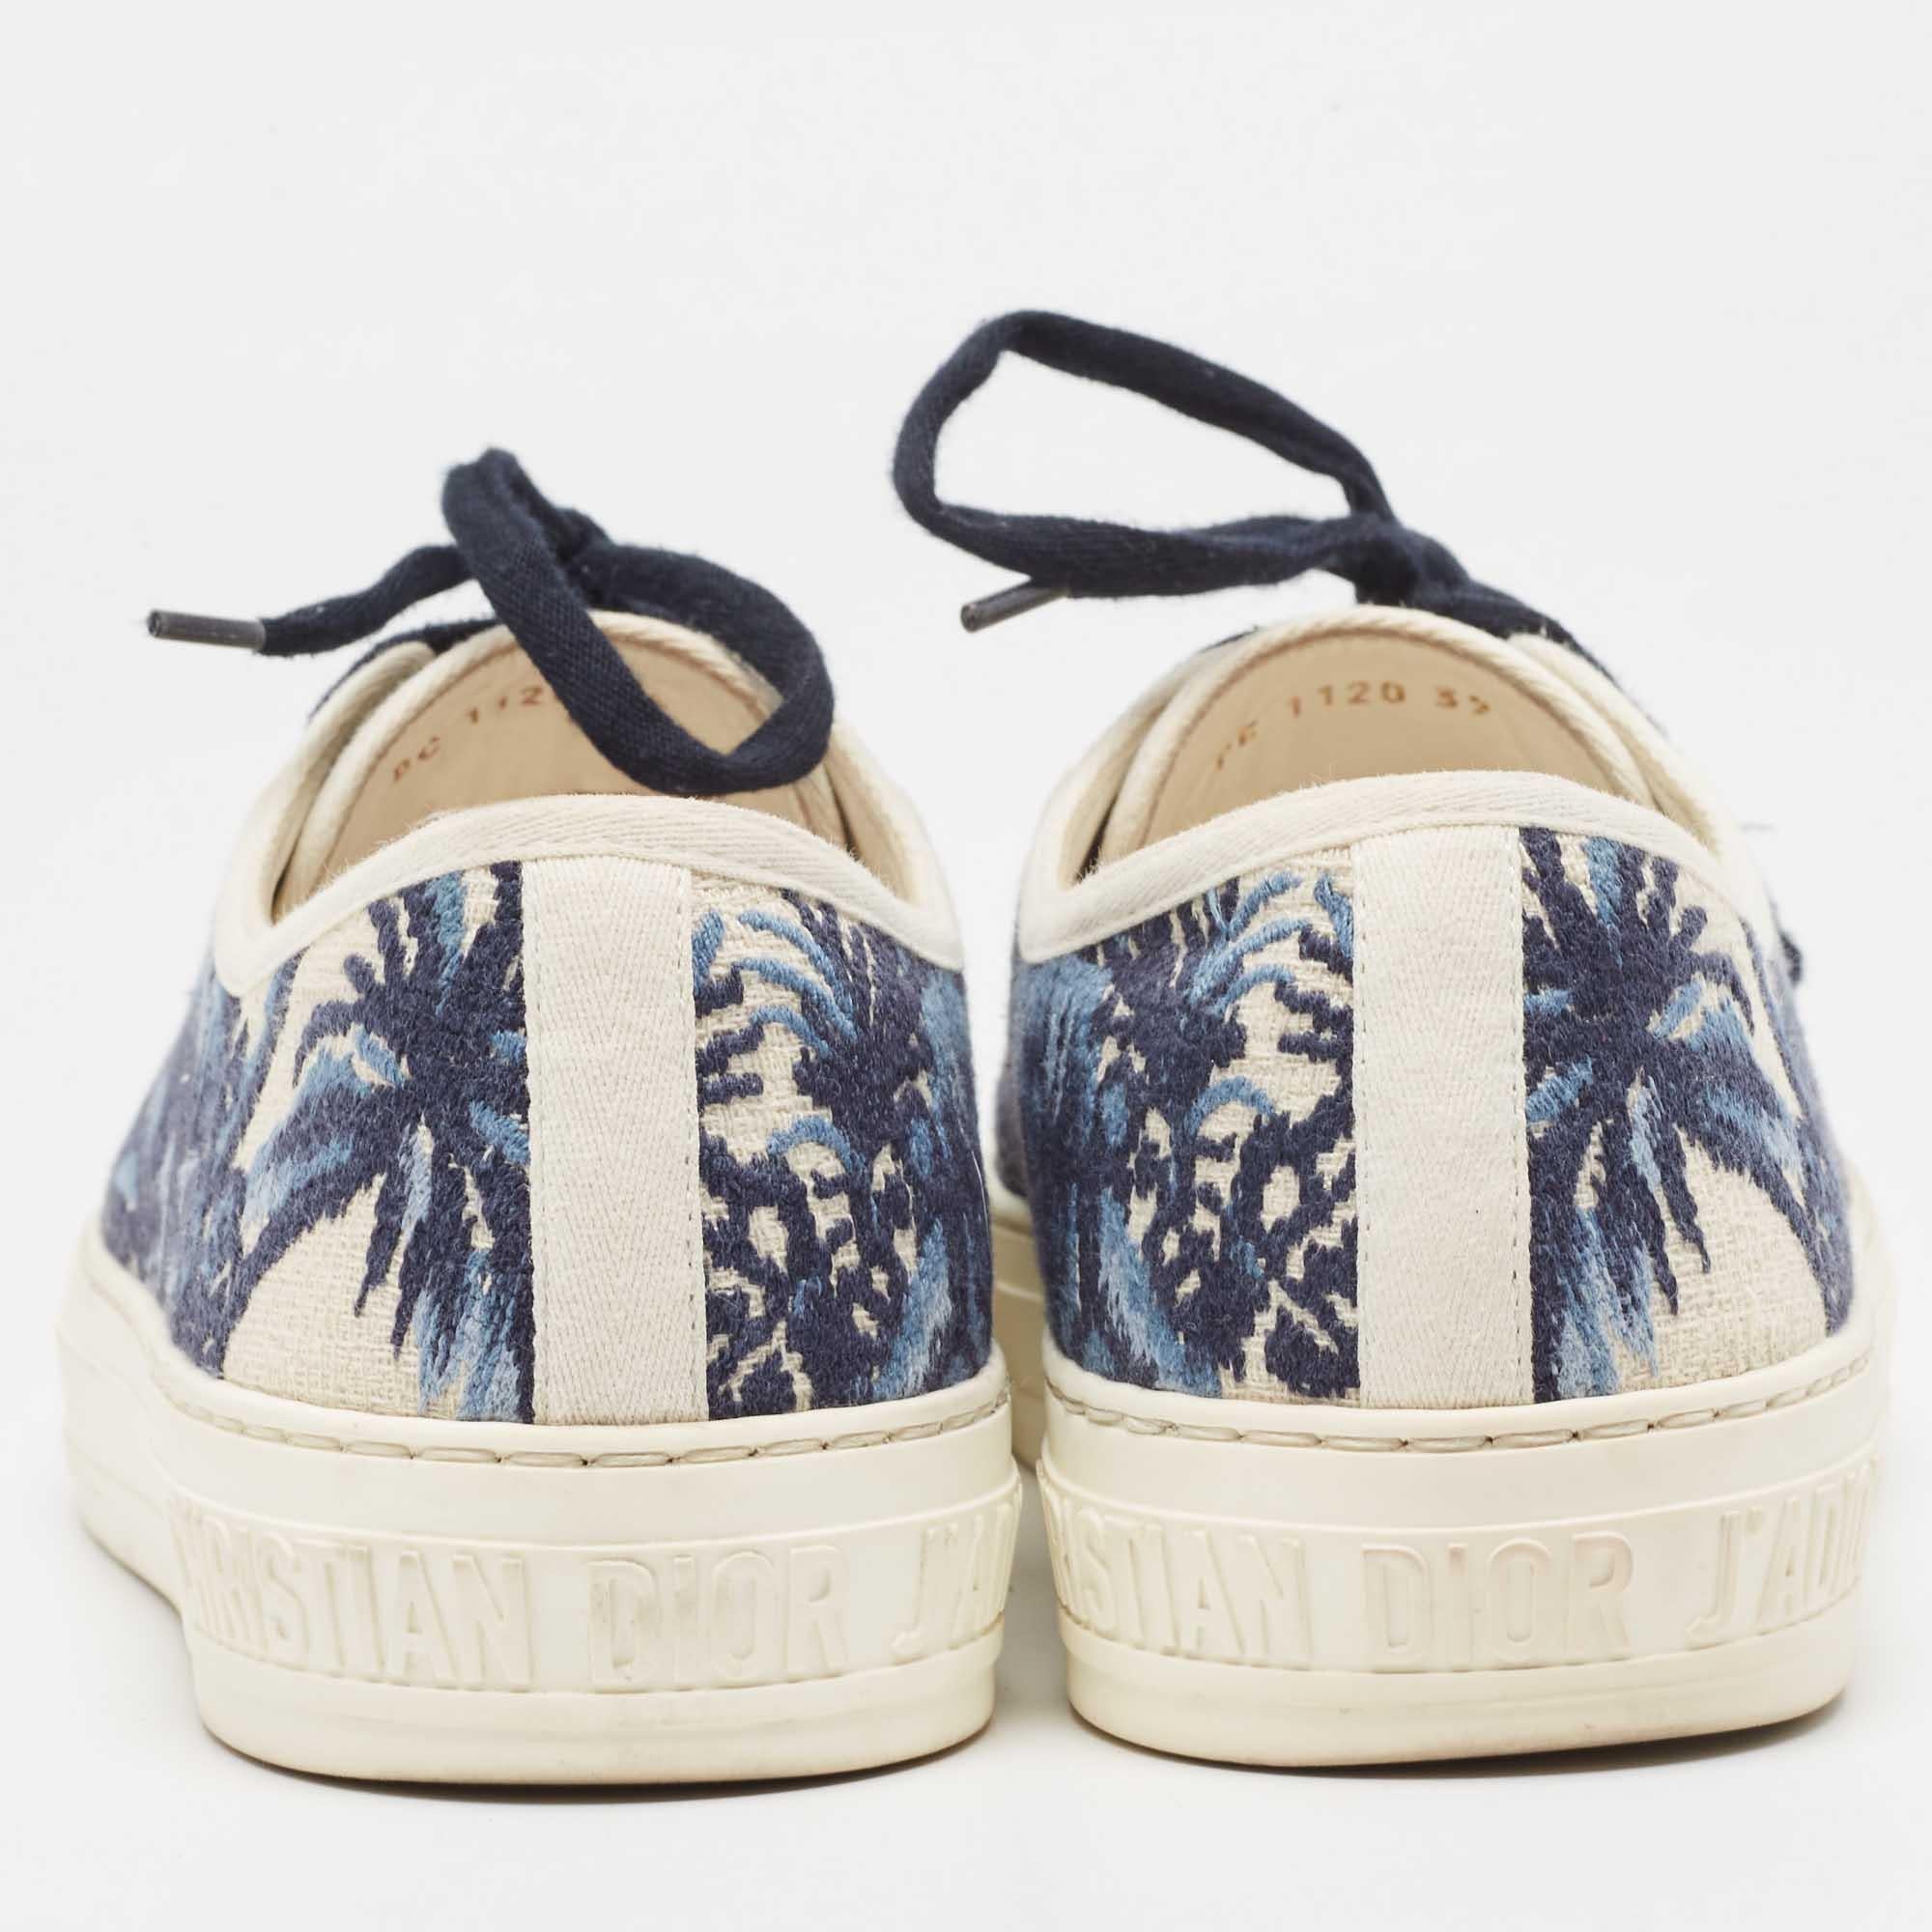 Dior Navy Blue/White Floral Embroidered Canvas Walk'n'Dior Sneakers Size 39 For Sale 1